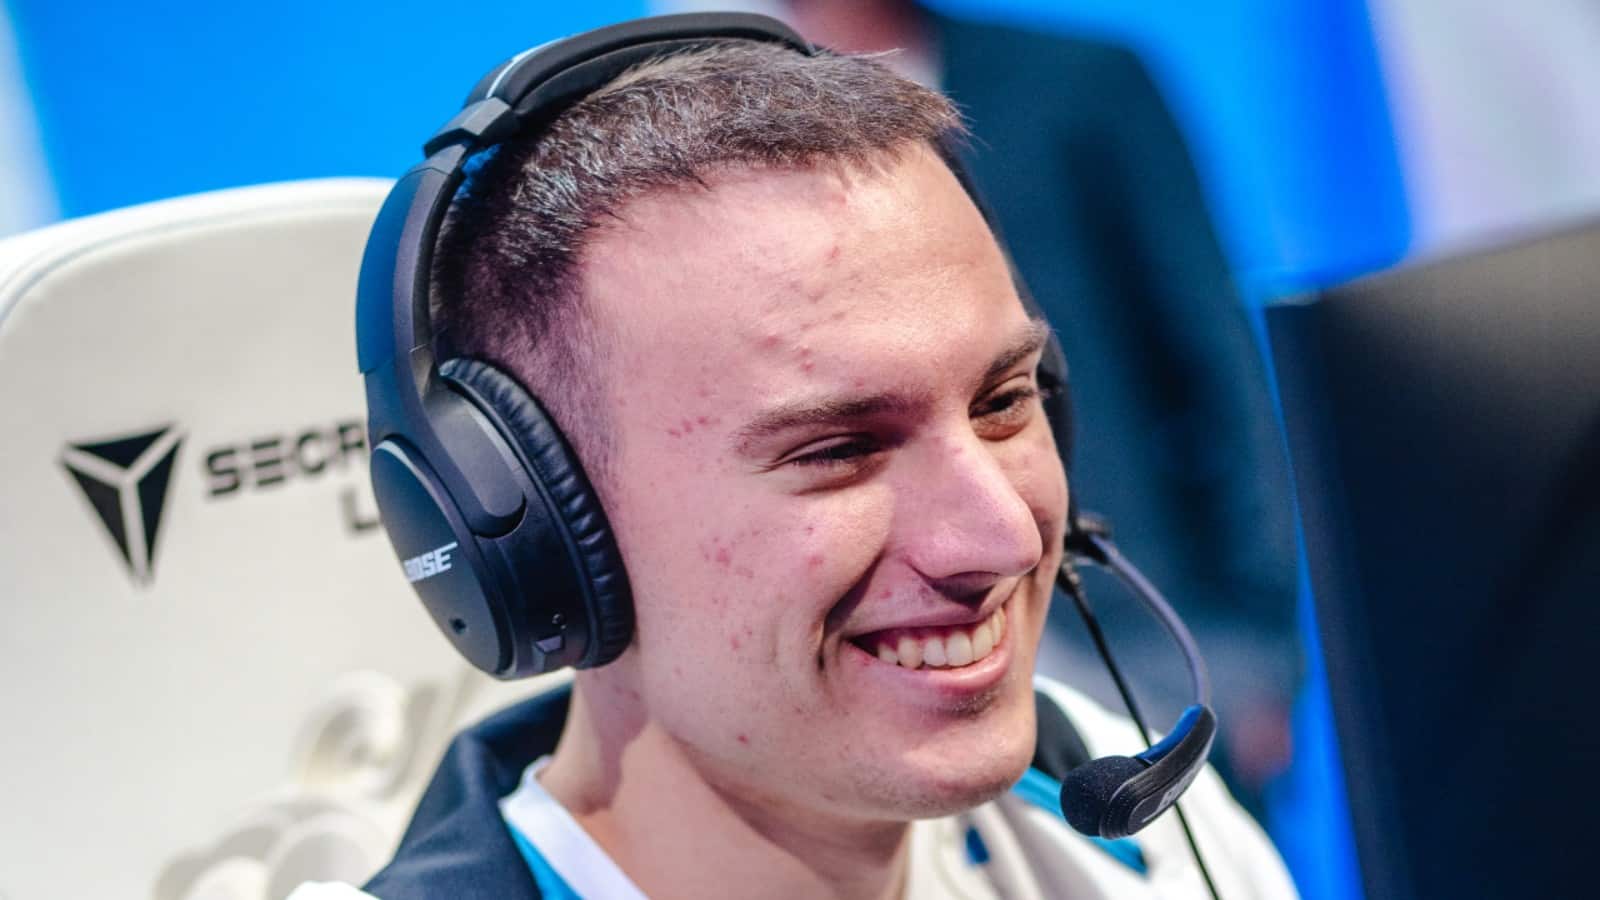 Cloud9's Perkz playing on Day 1 of Worlds 2021